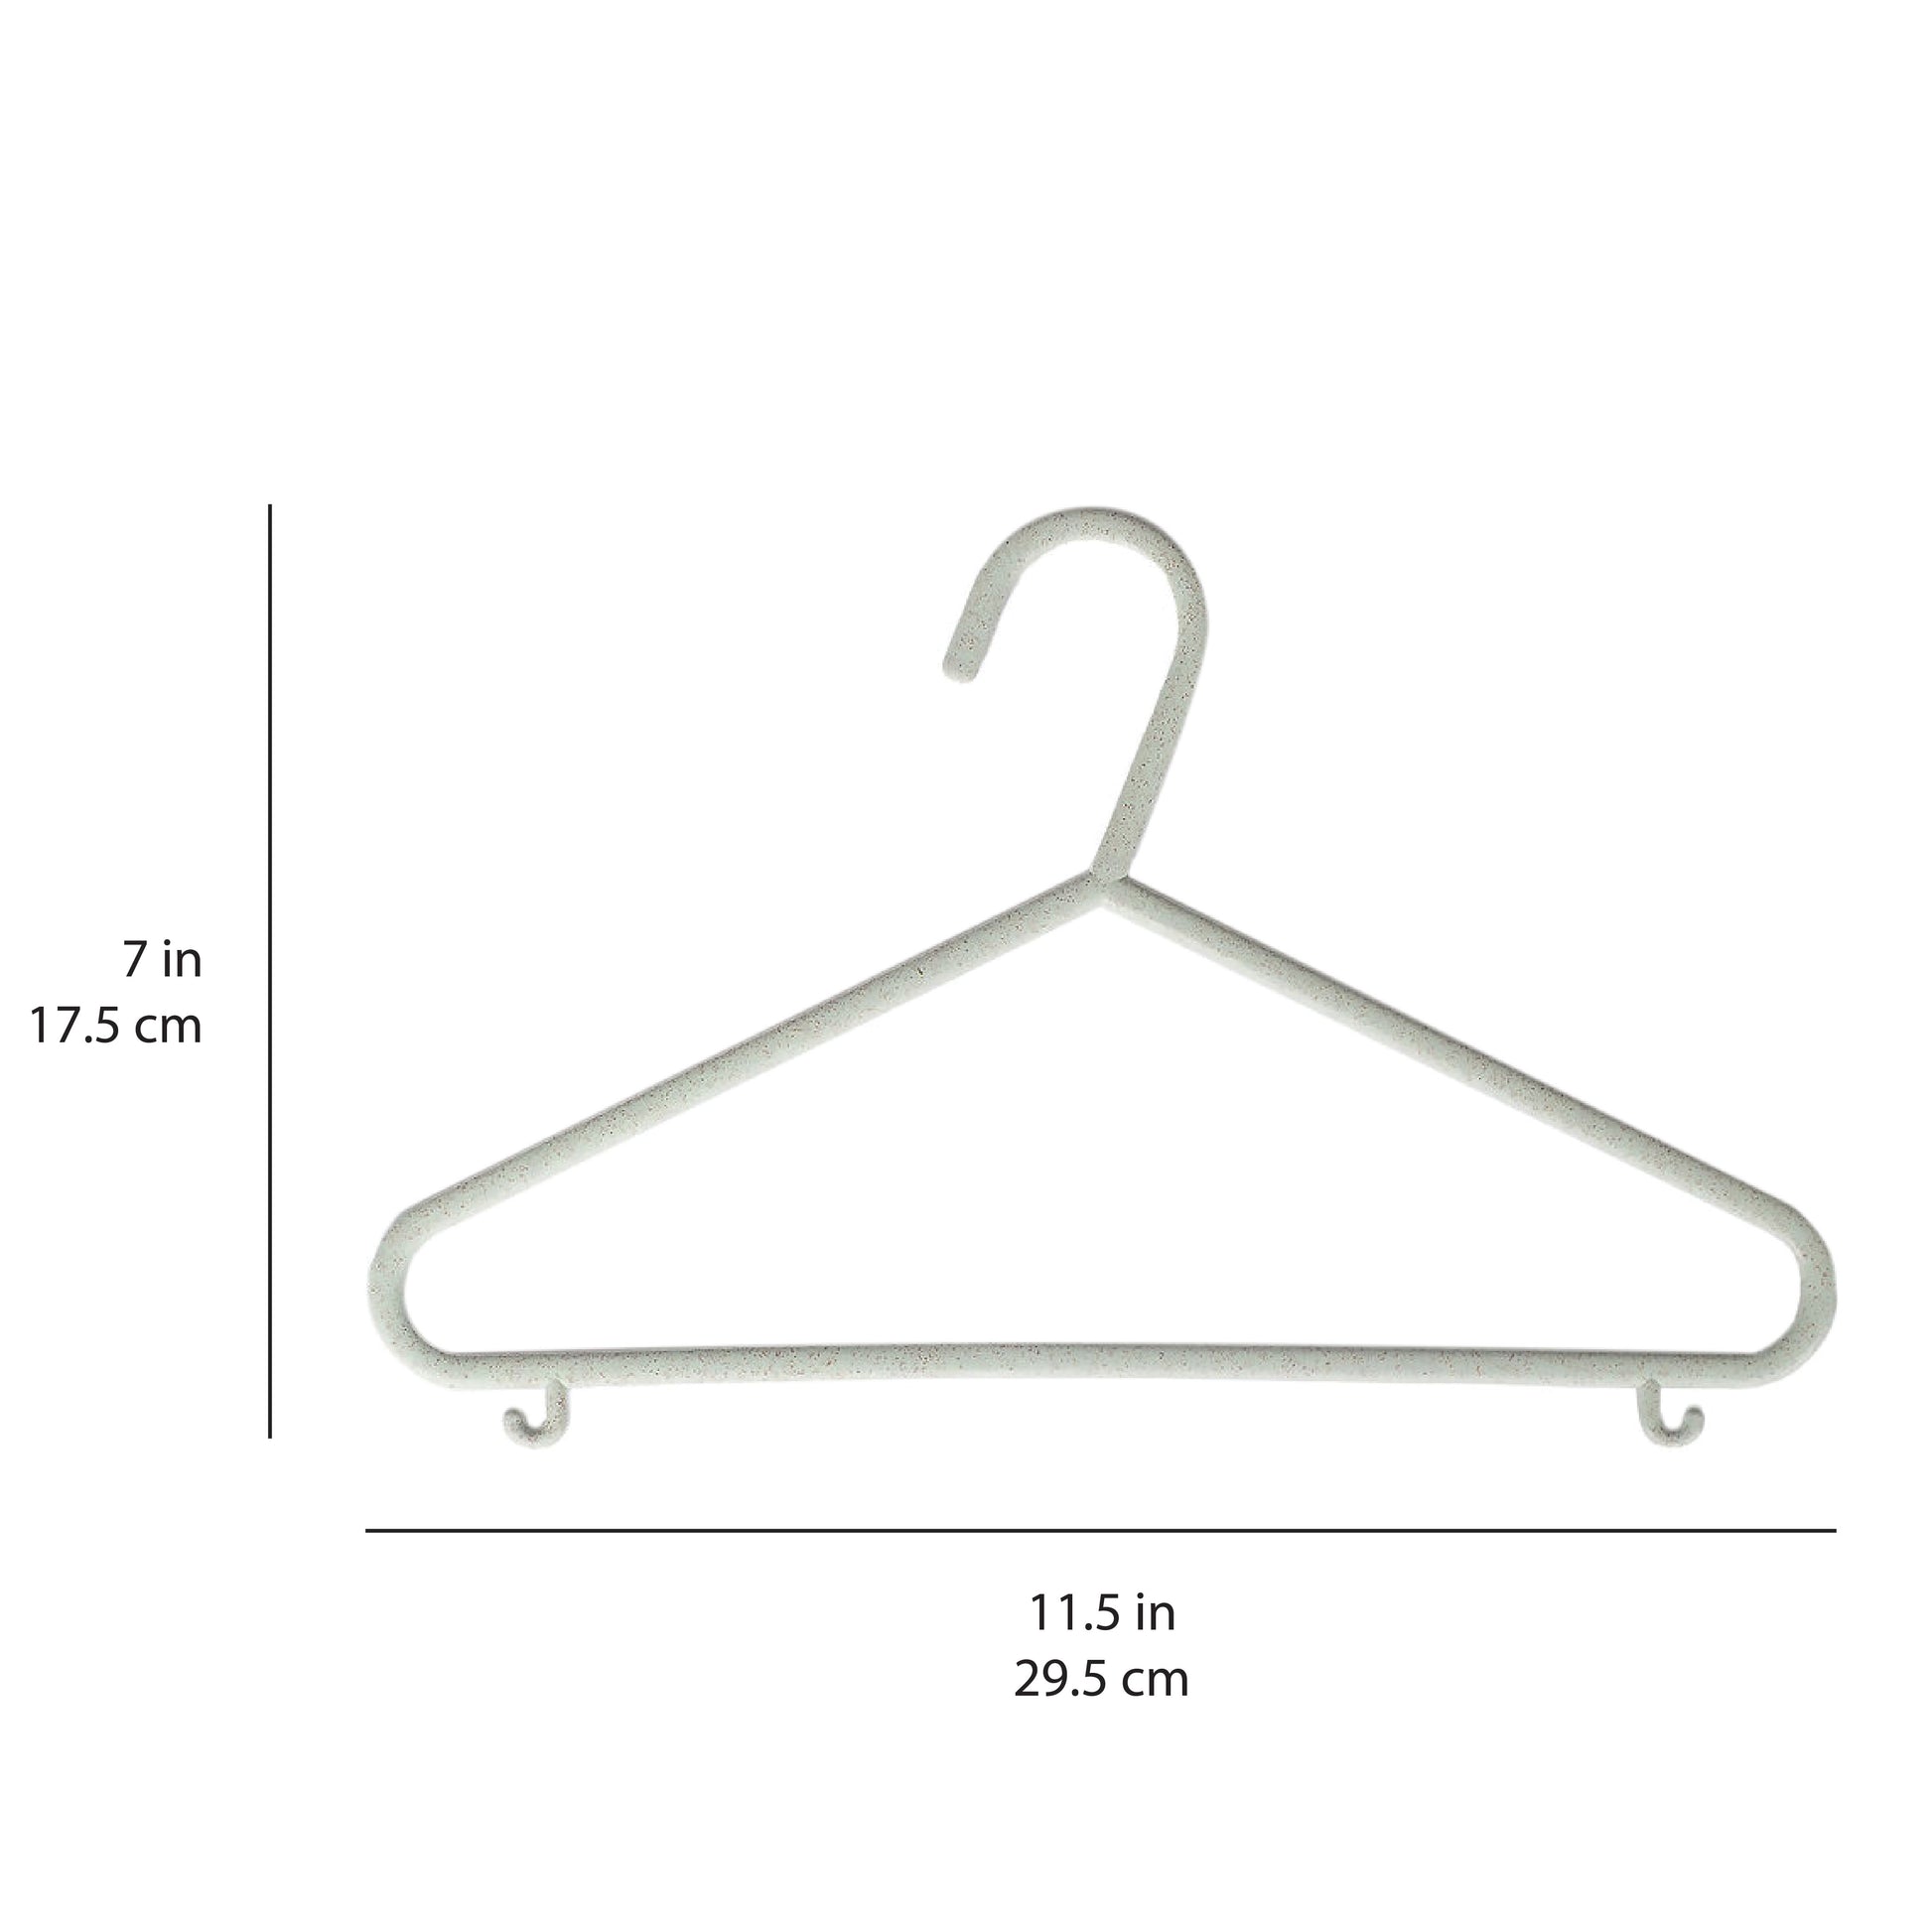 Plastic Clothes Hangers With Black And White Color Of Many Size